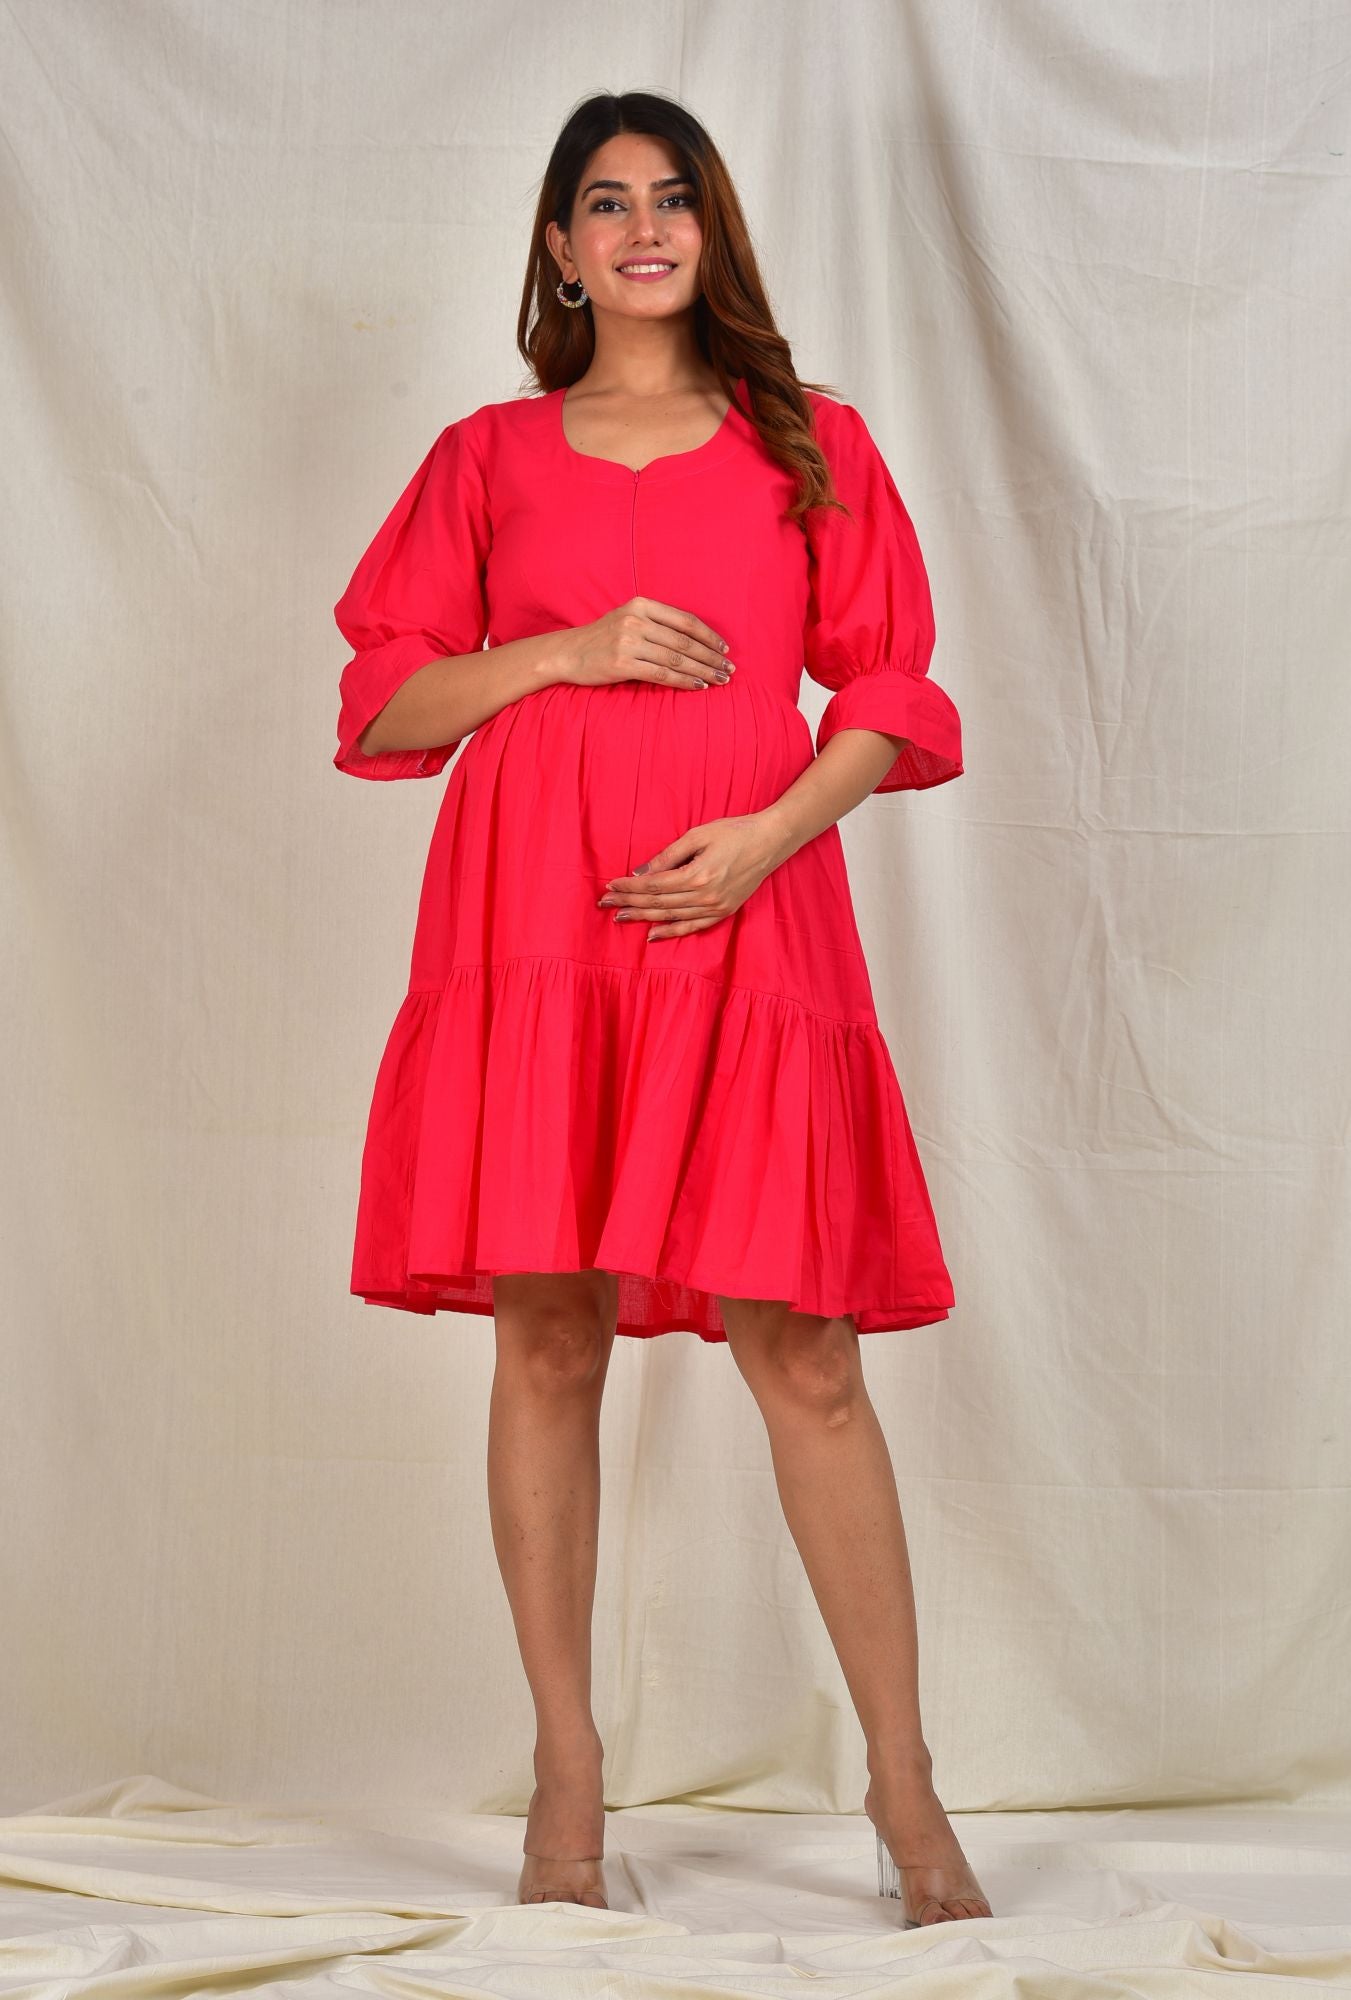 Solid Red Maternity Short Dress For Feeding